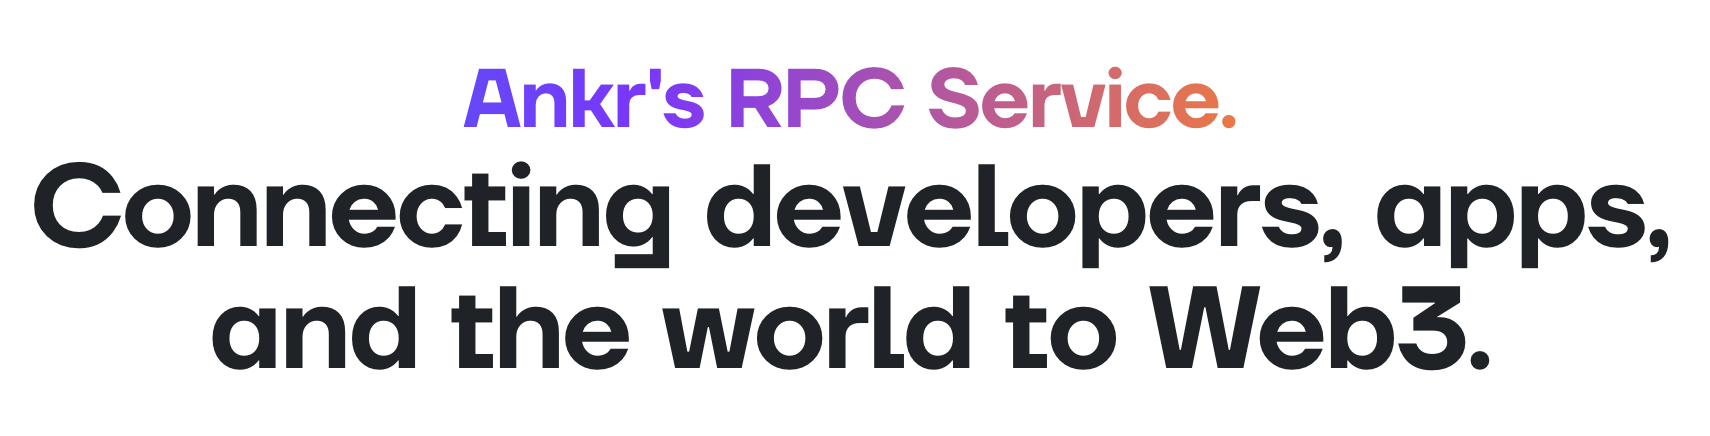 RPC Overview